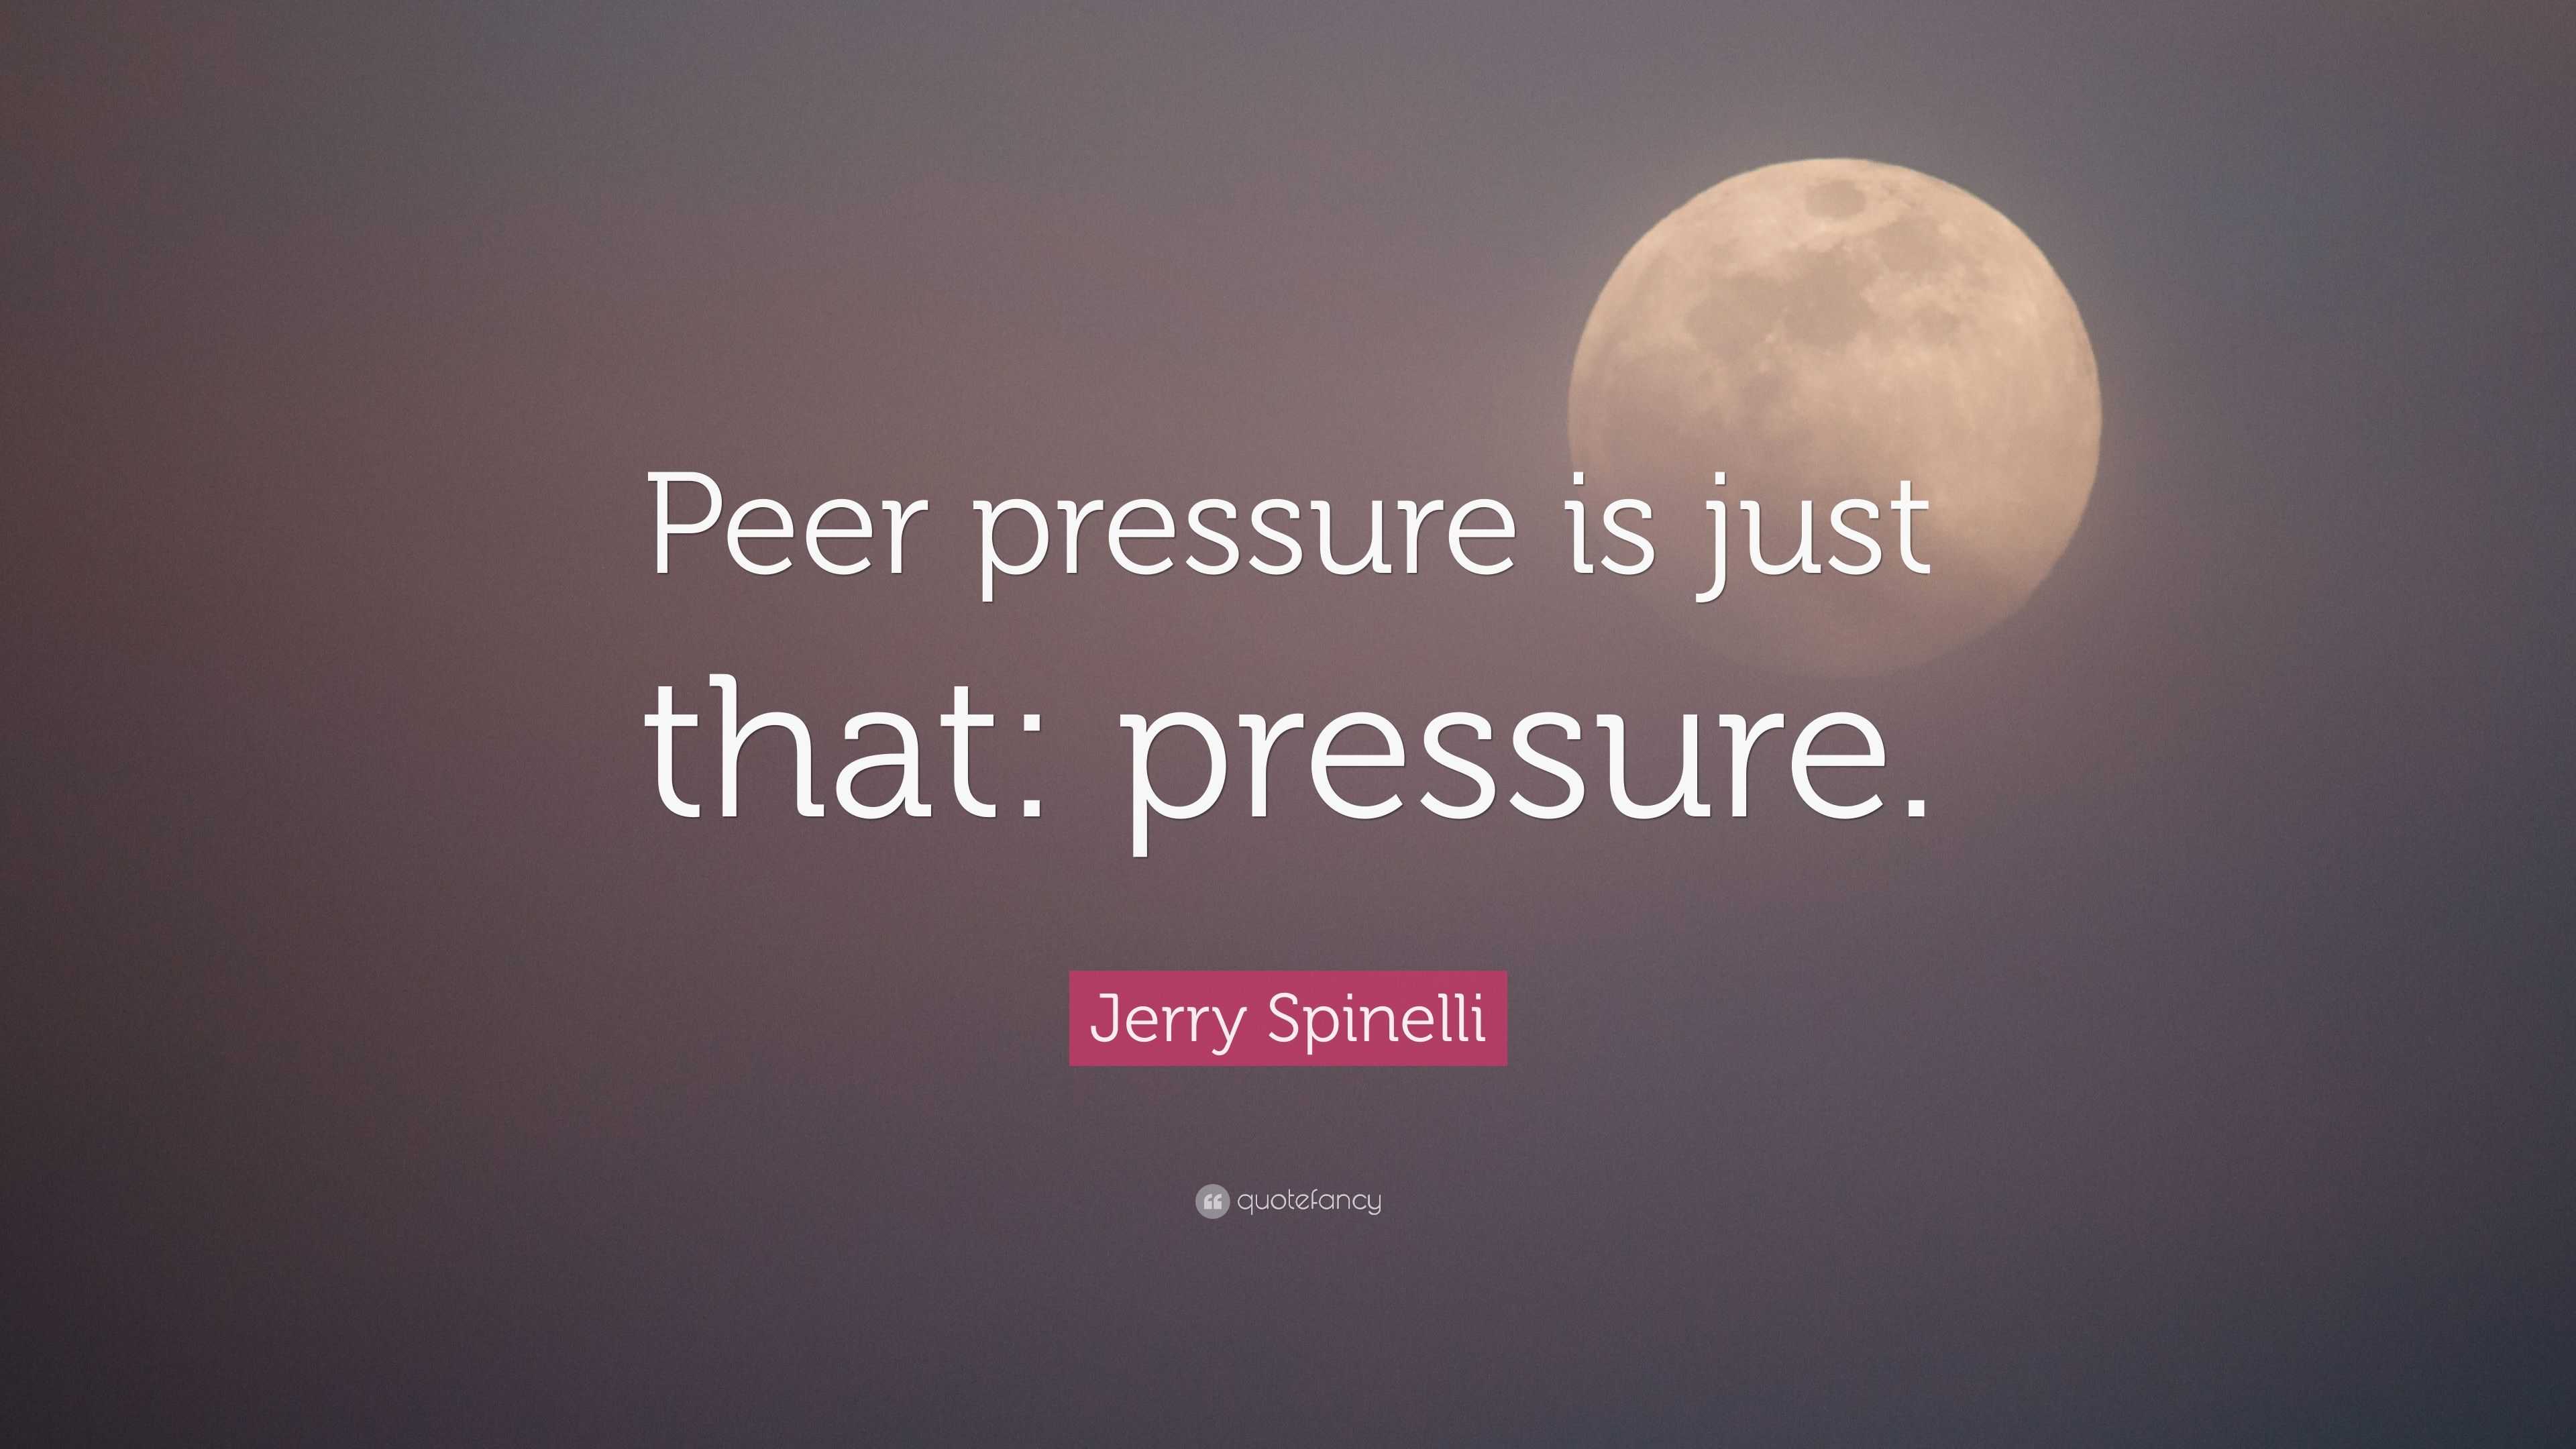 Jerry Spinelli Quote “peer Pressure Is Just That Pressure” 9178